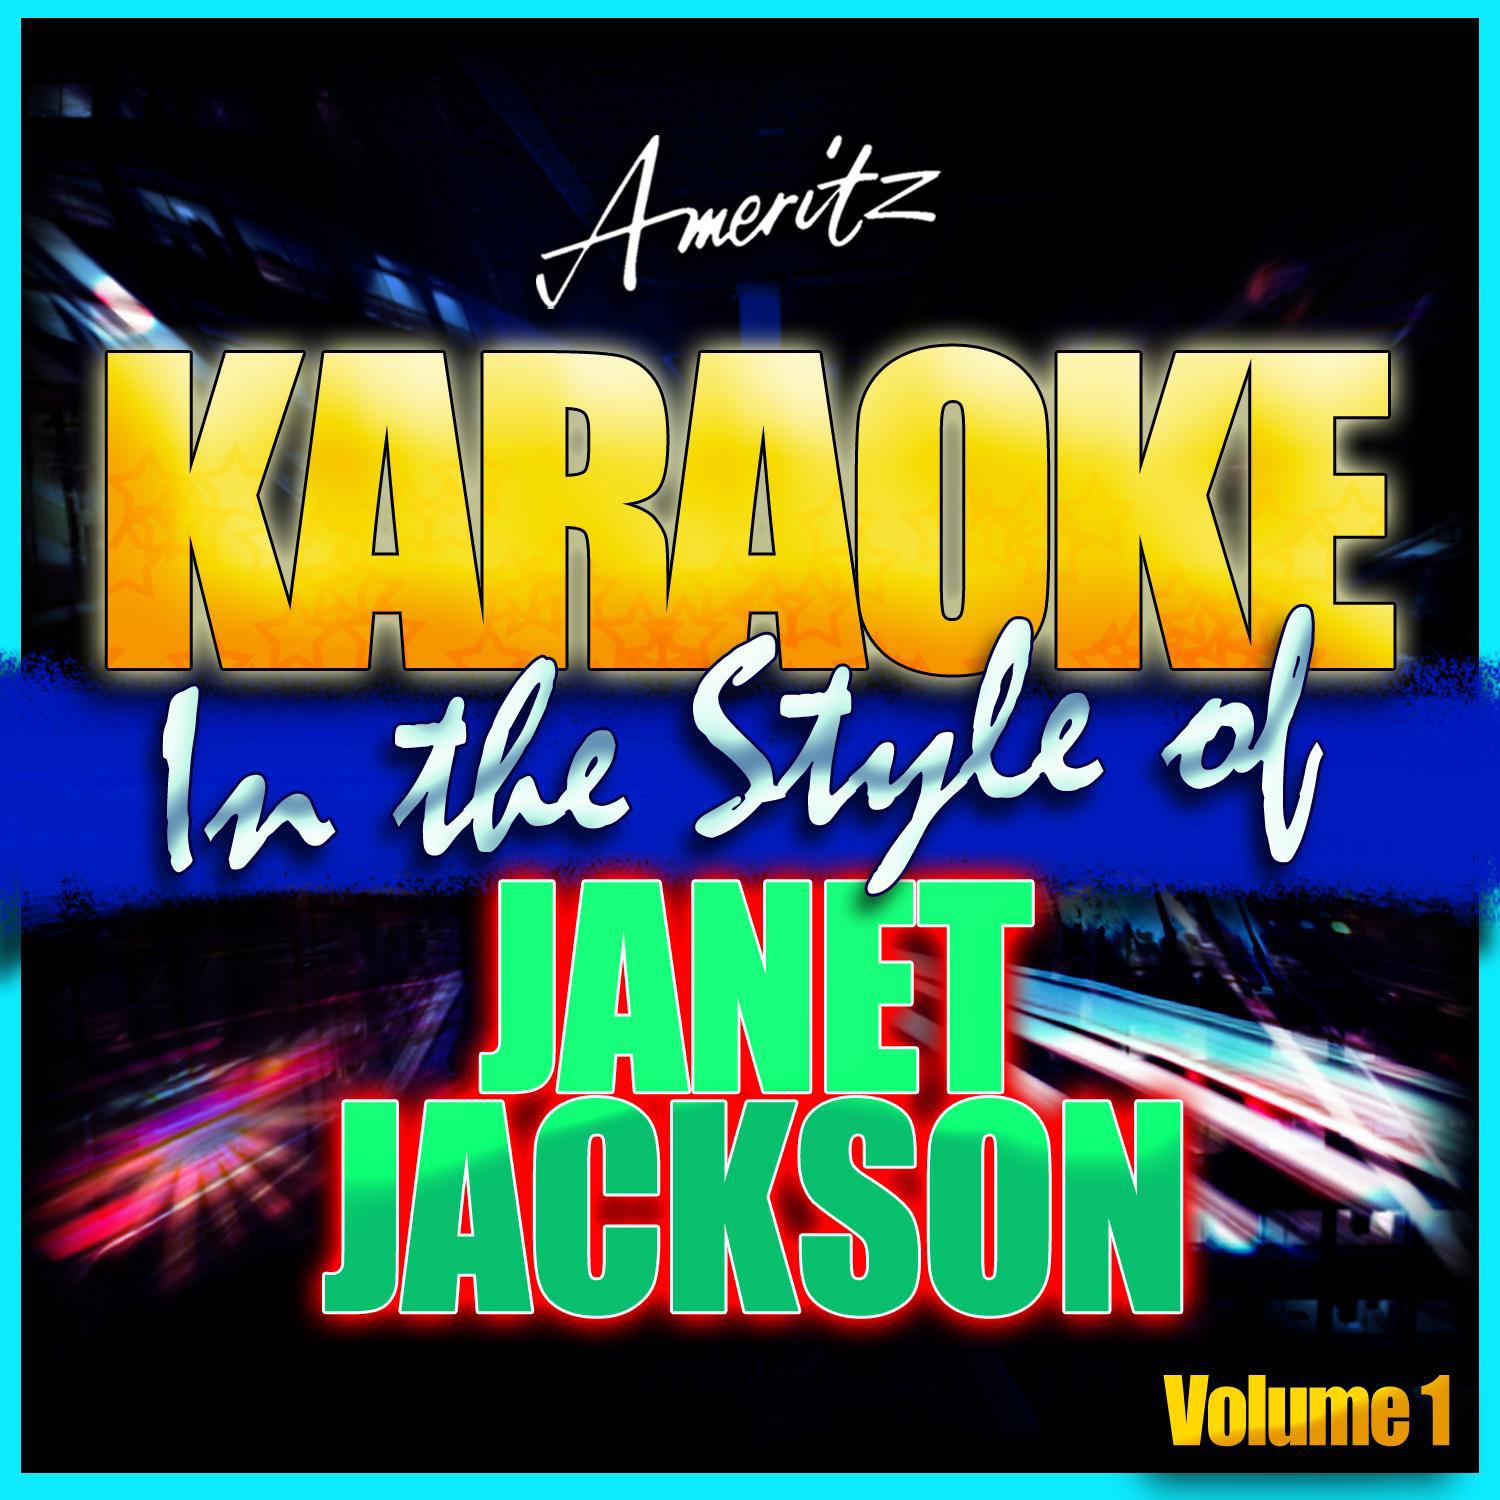 Alright (In the Style of Janet Jackson) [Karaoke Version]